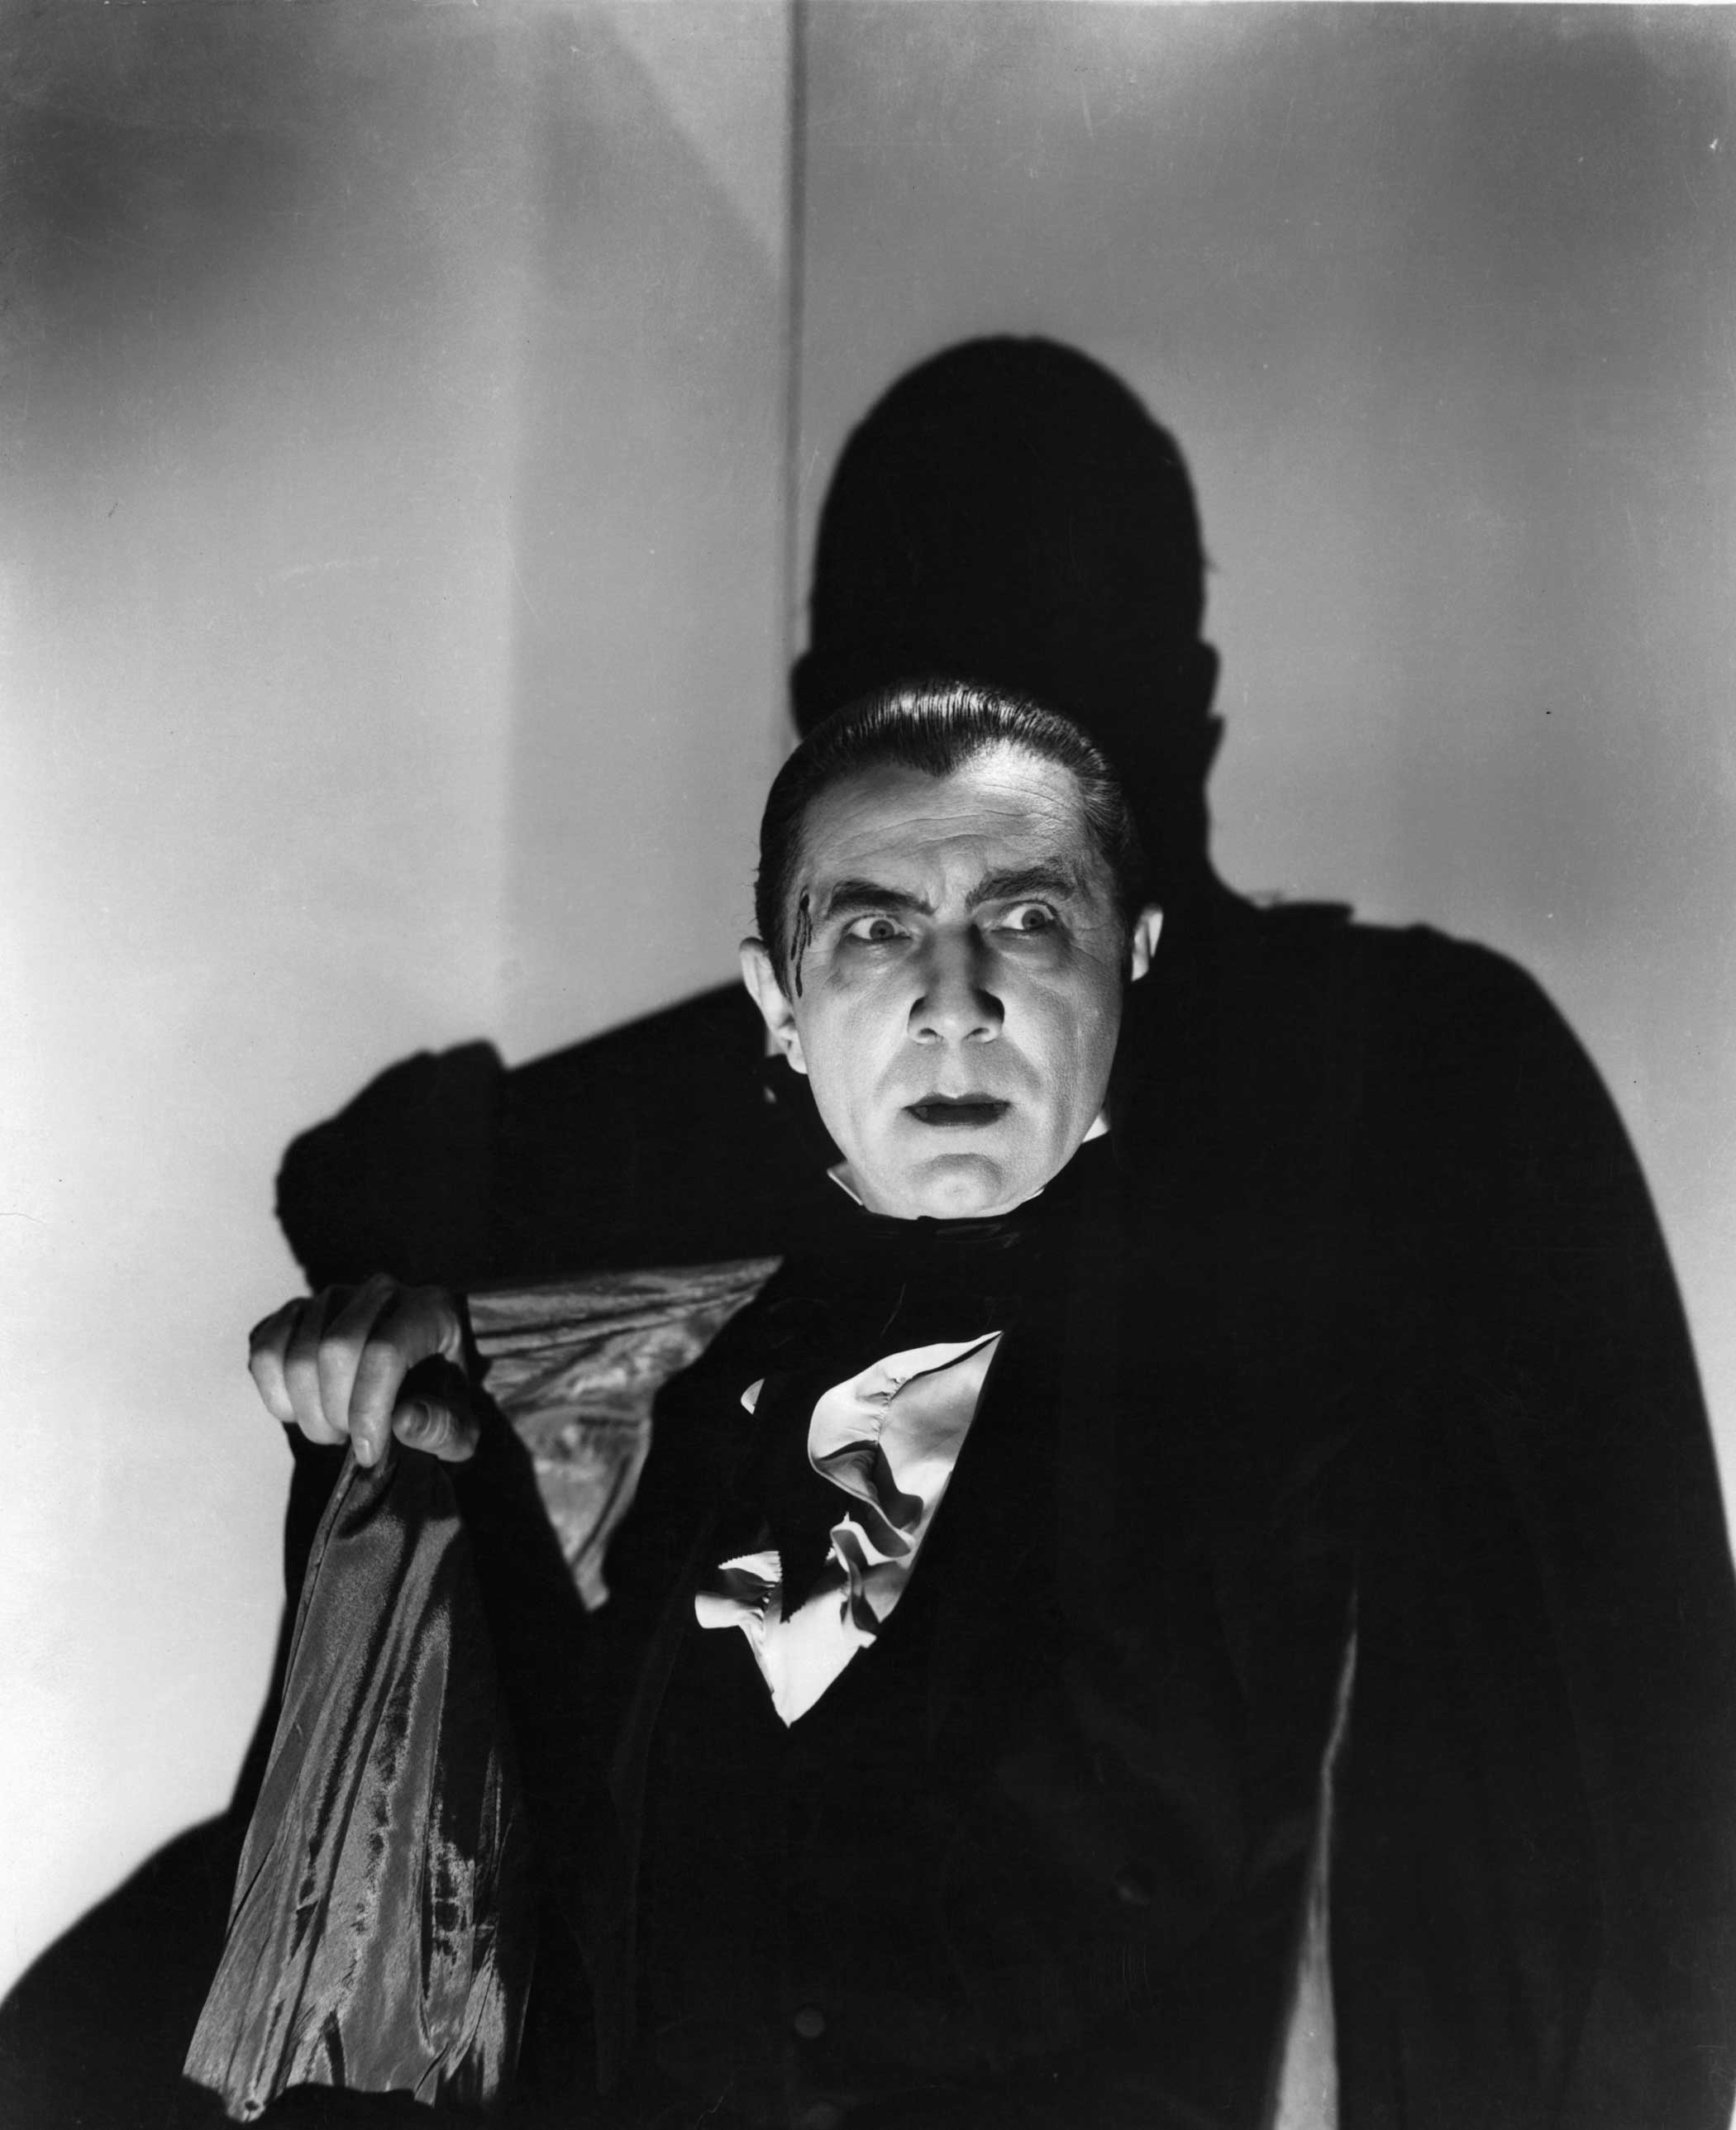 Count Dracula from Dracula, 1931.